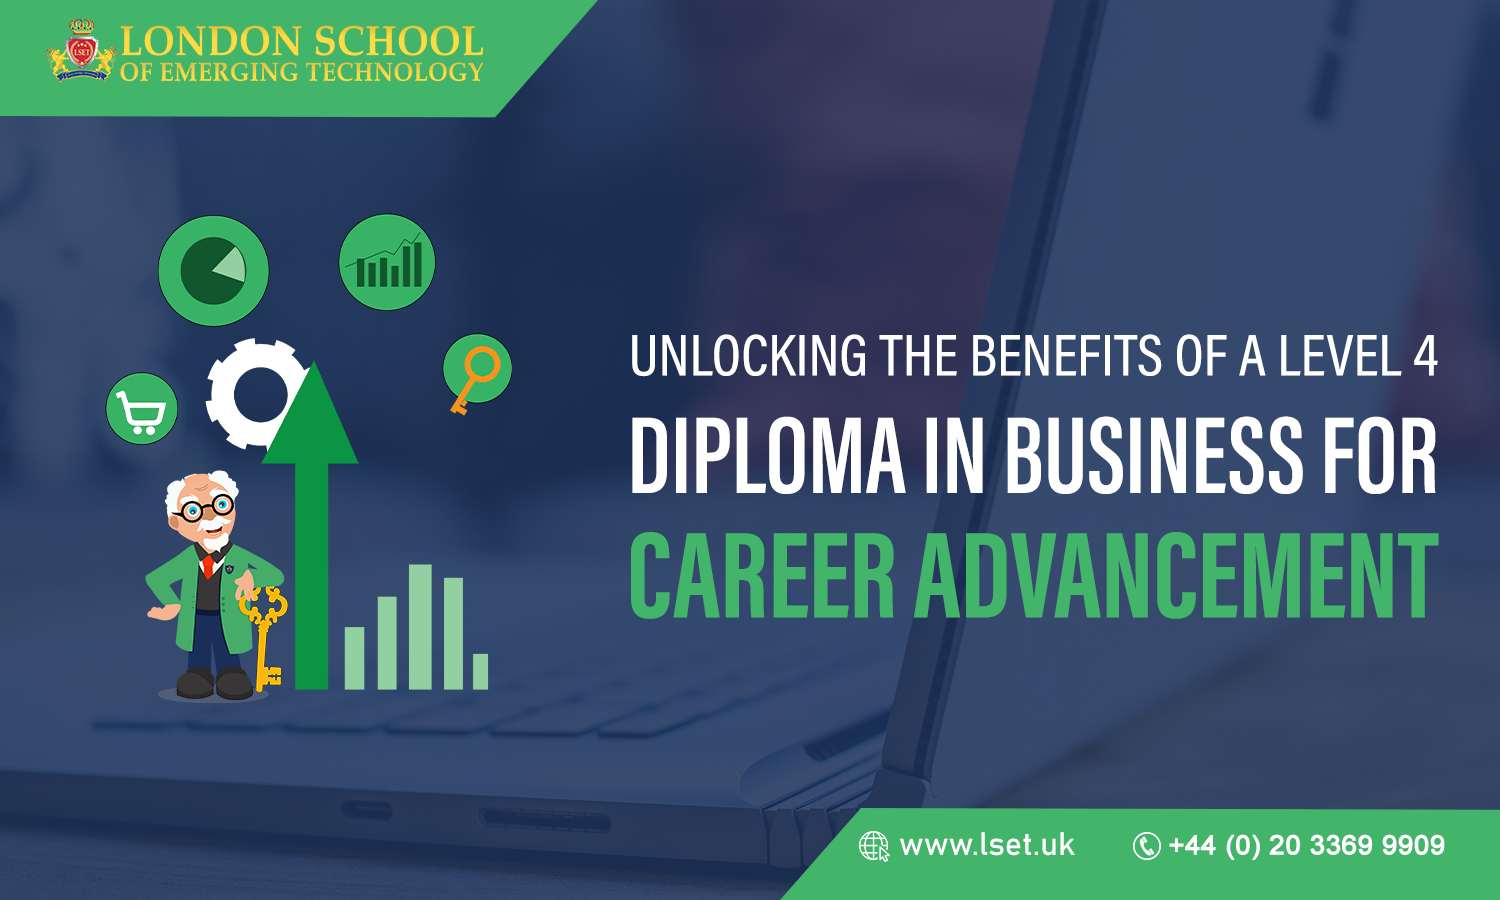 Unlocking the Benefits of a Level 4 Diploma in Business for Career Advancement